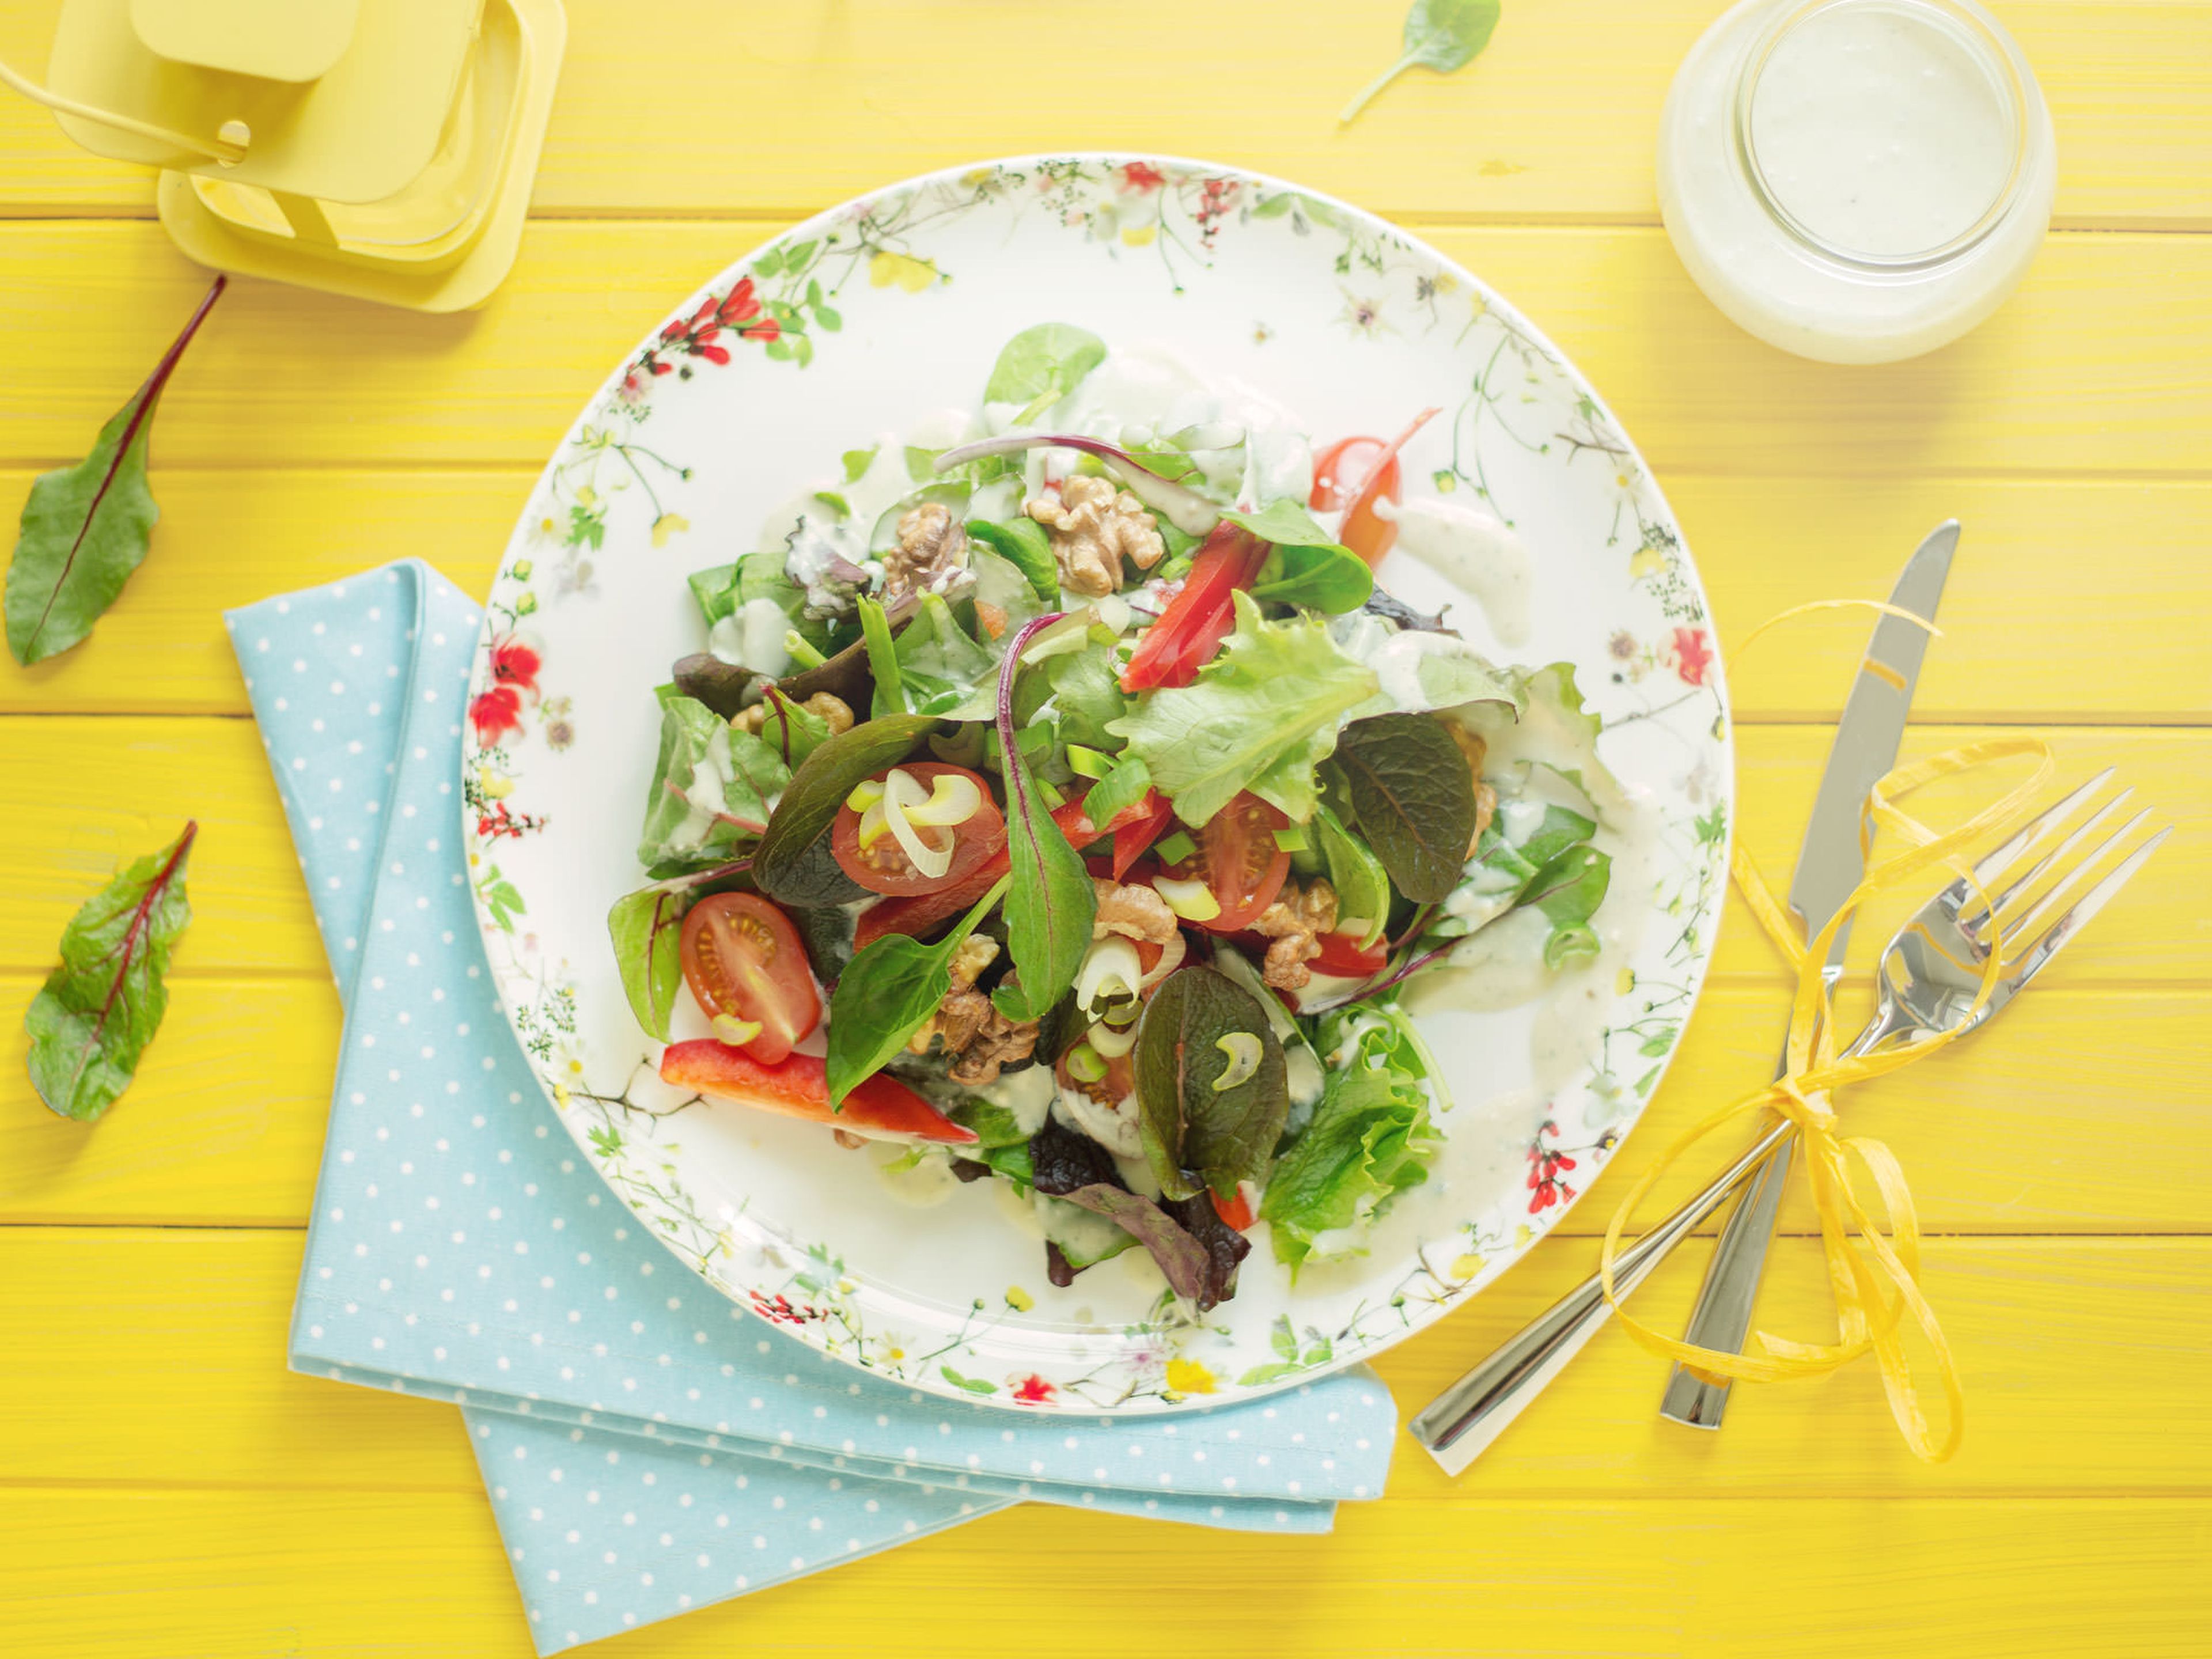 Summer salad with blue cheese dressing